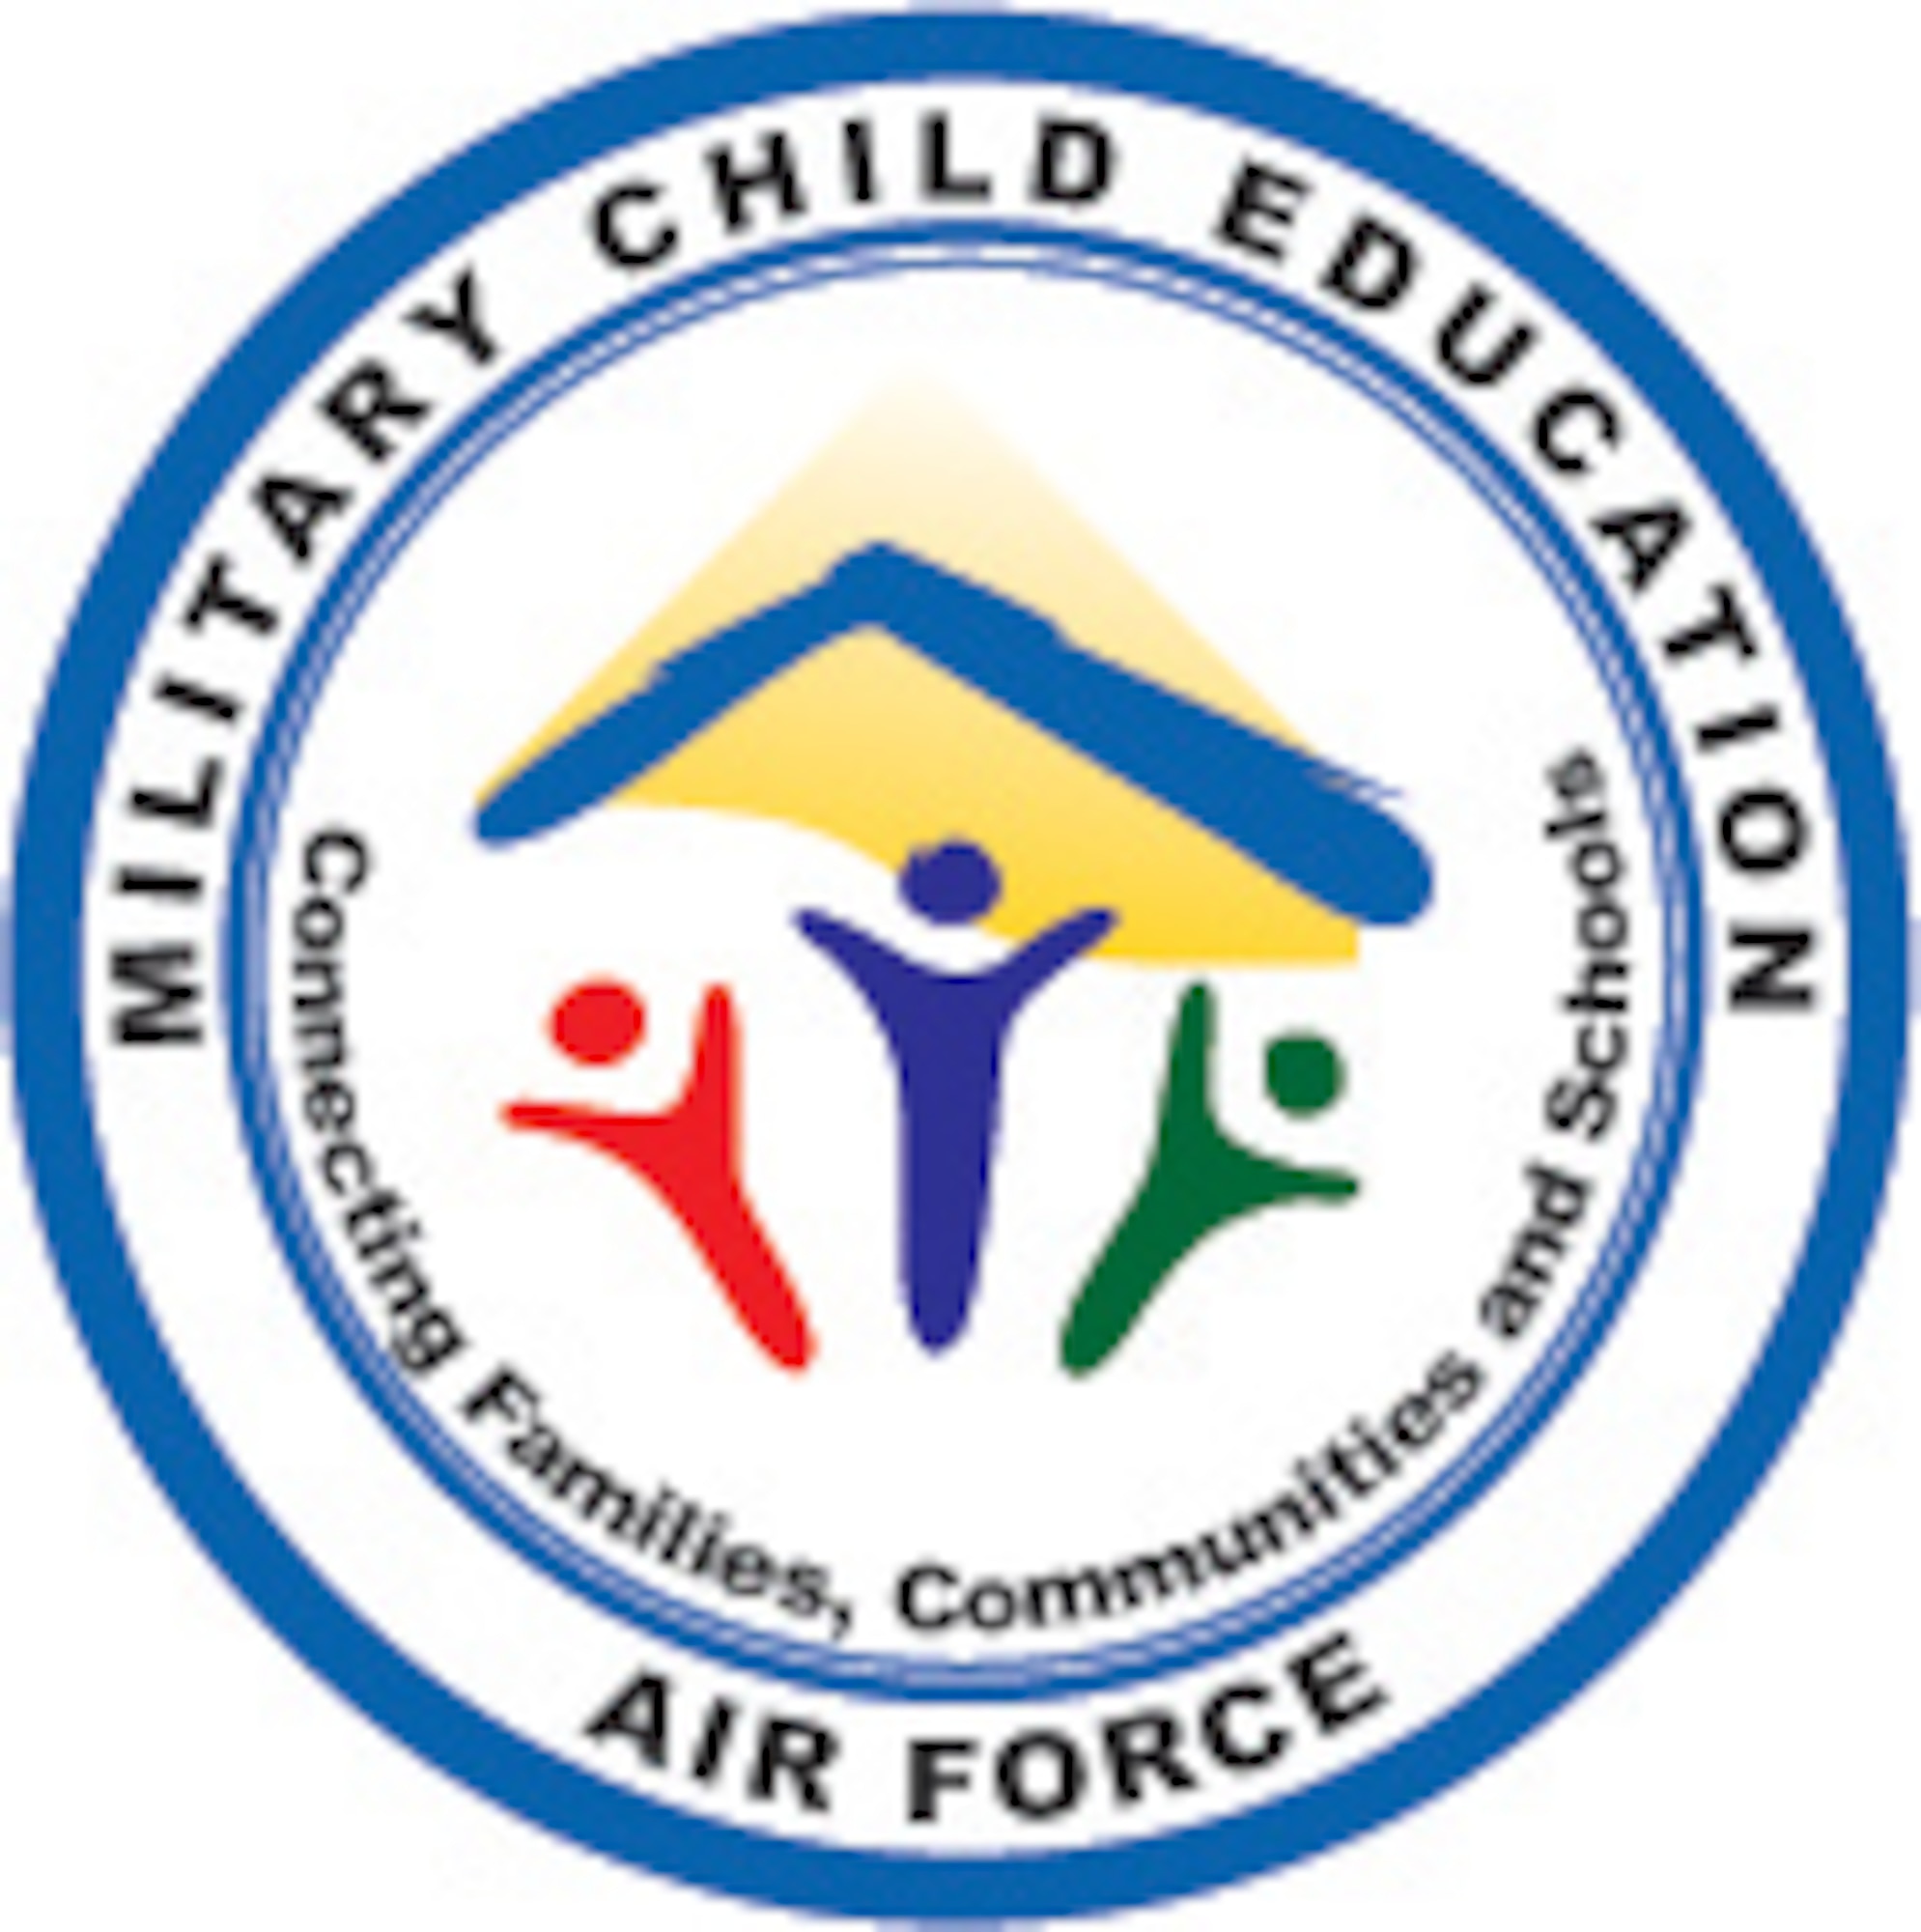 The school liaison officer provides information to military families and schools to ensure military children receive the best possible education. Ann Lukens, 23rd Force Support Squadron, is the school liaison officer for Moody. (U.S. Air Force illustration)